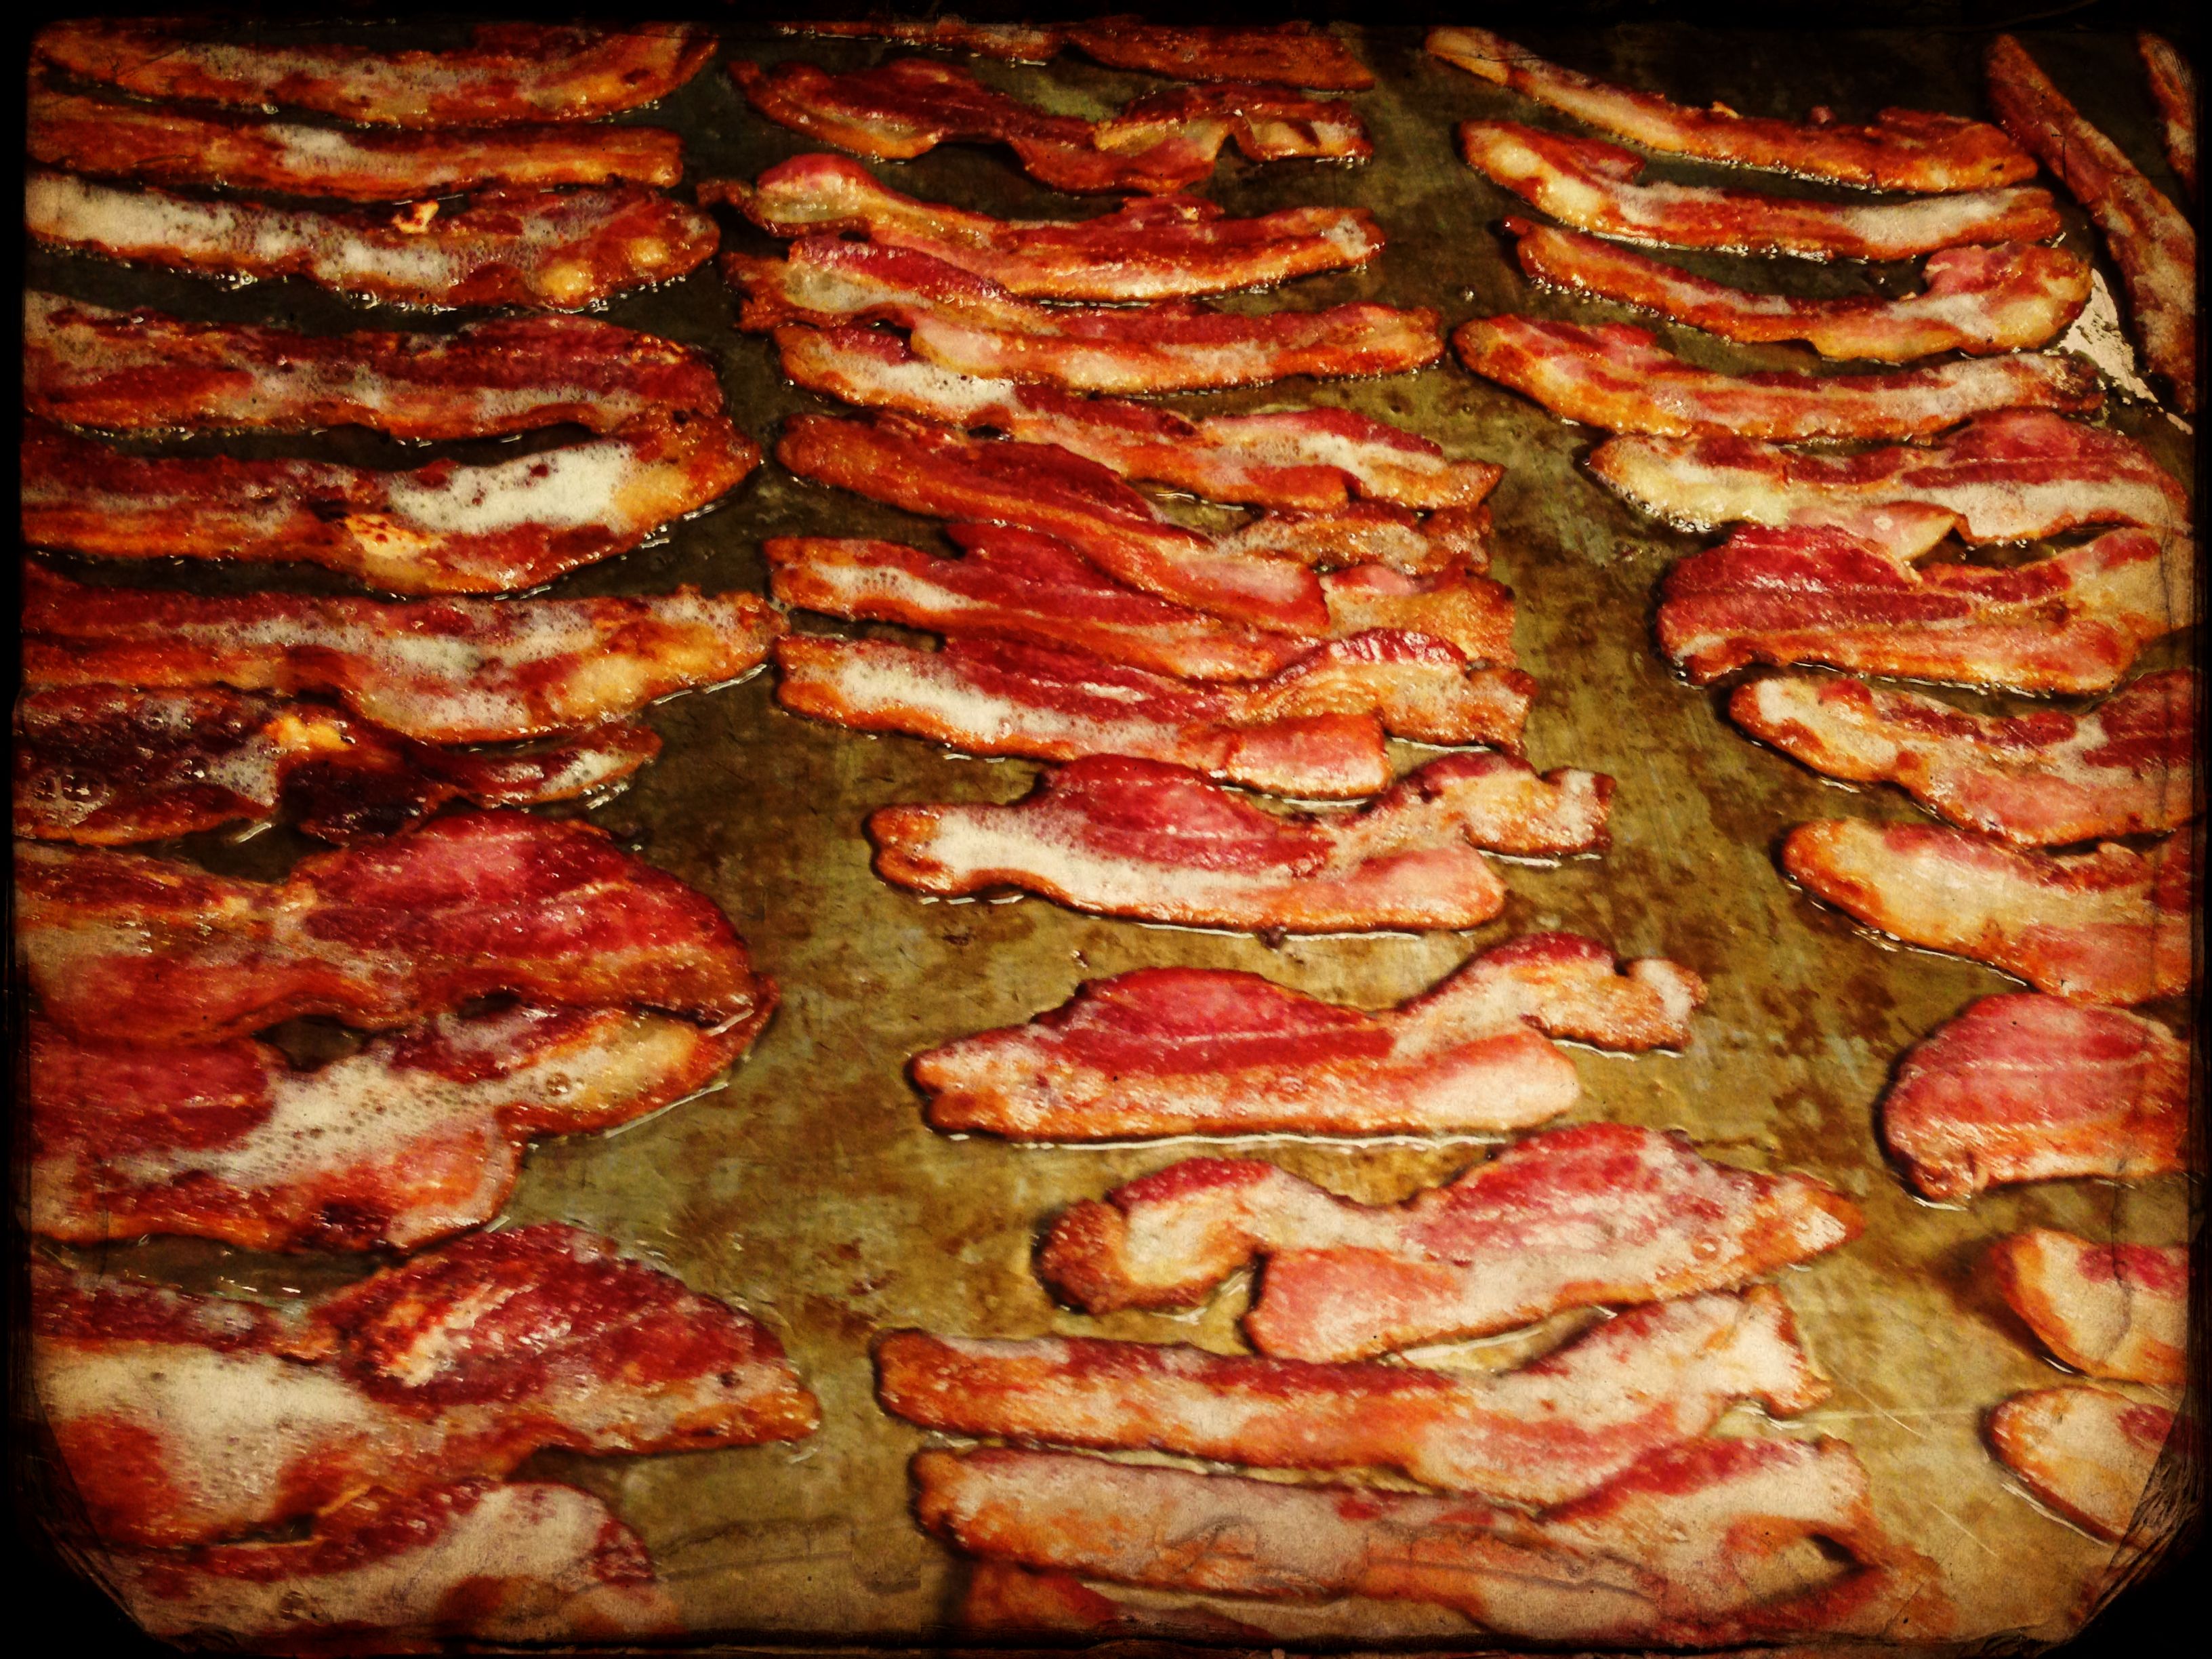 awesome bacon!!!